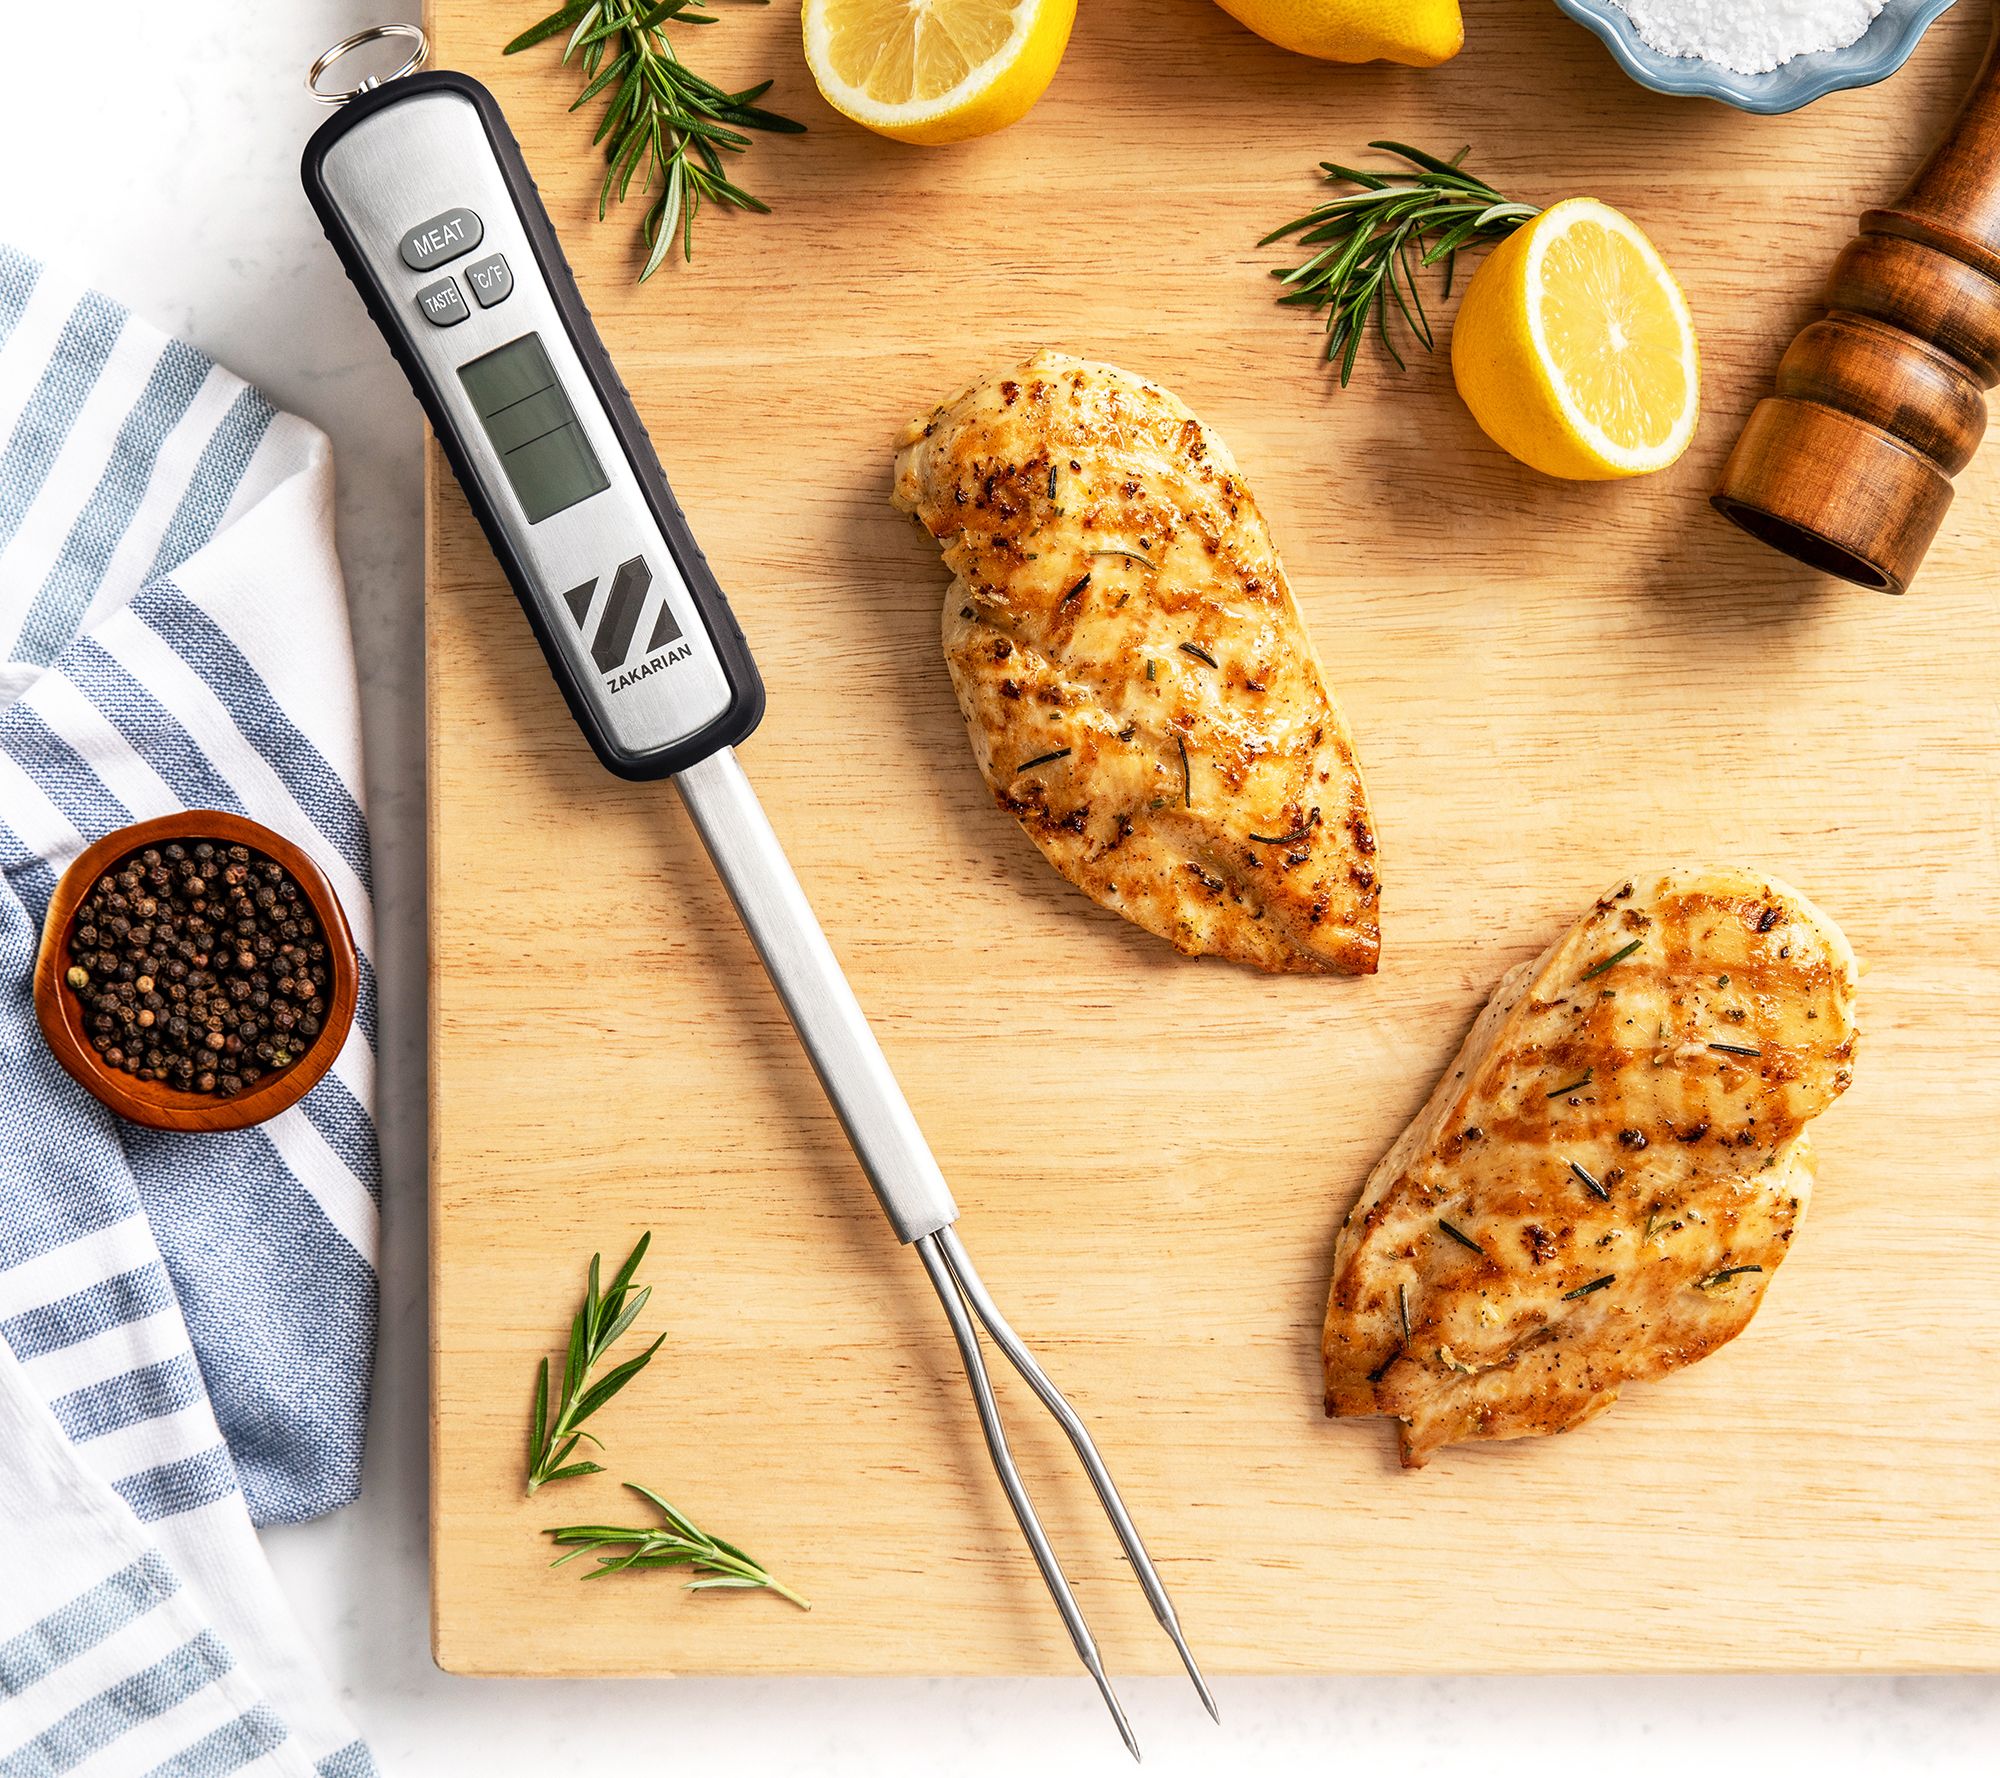 Zakarian by Dash Digital Fork Thermometer